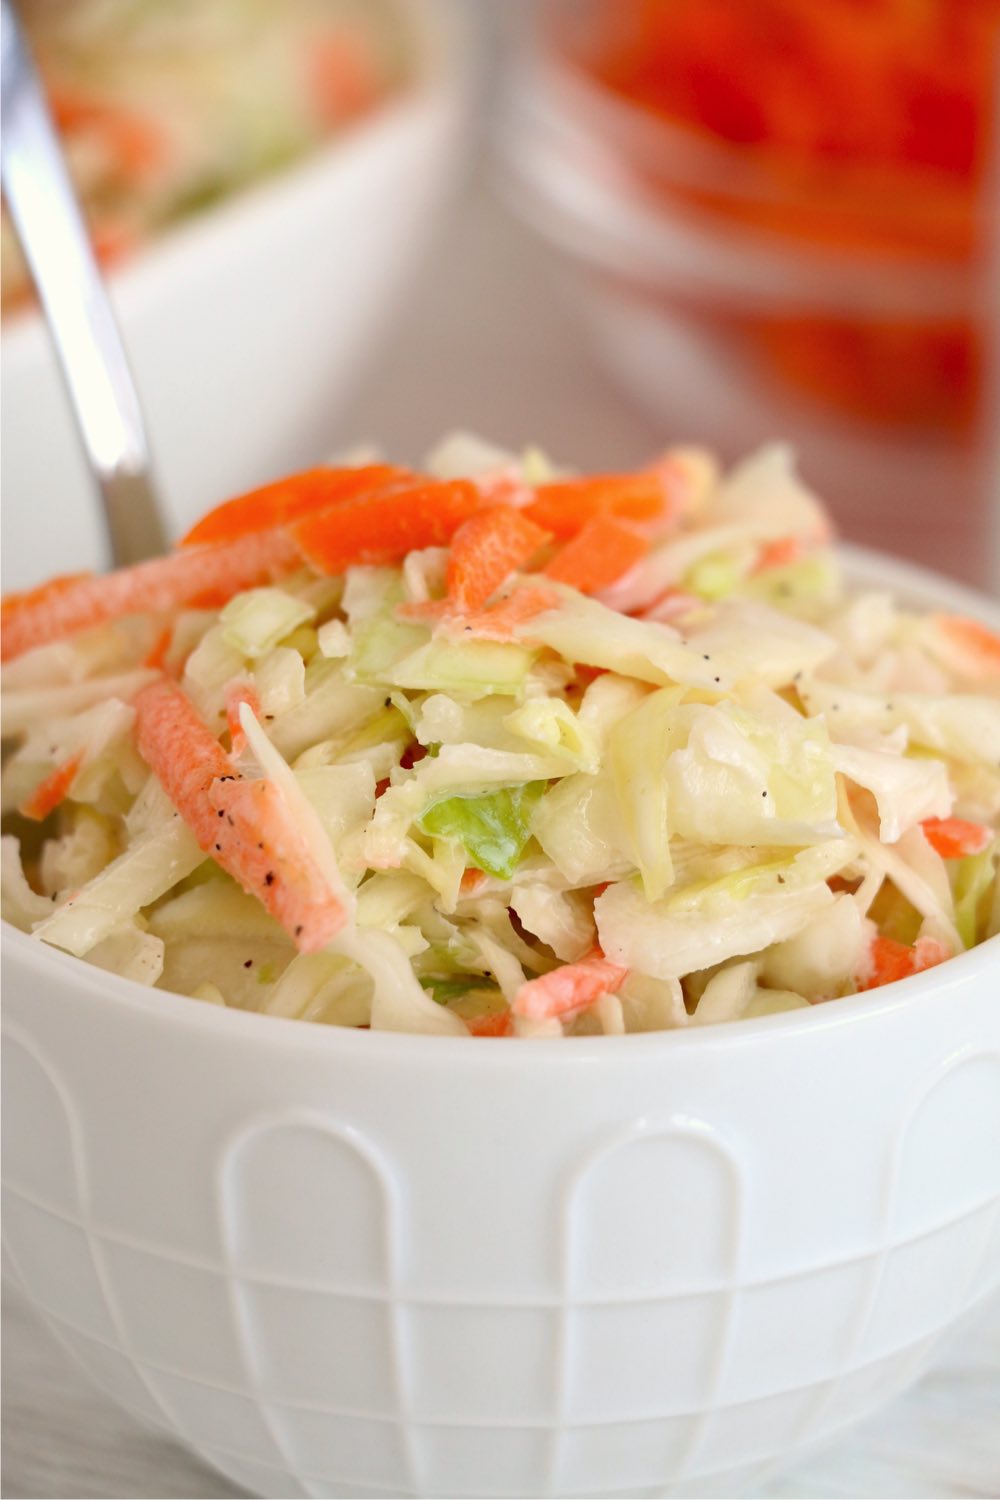 up close shot of coleslaw in small white bowl